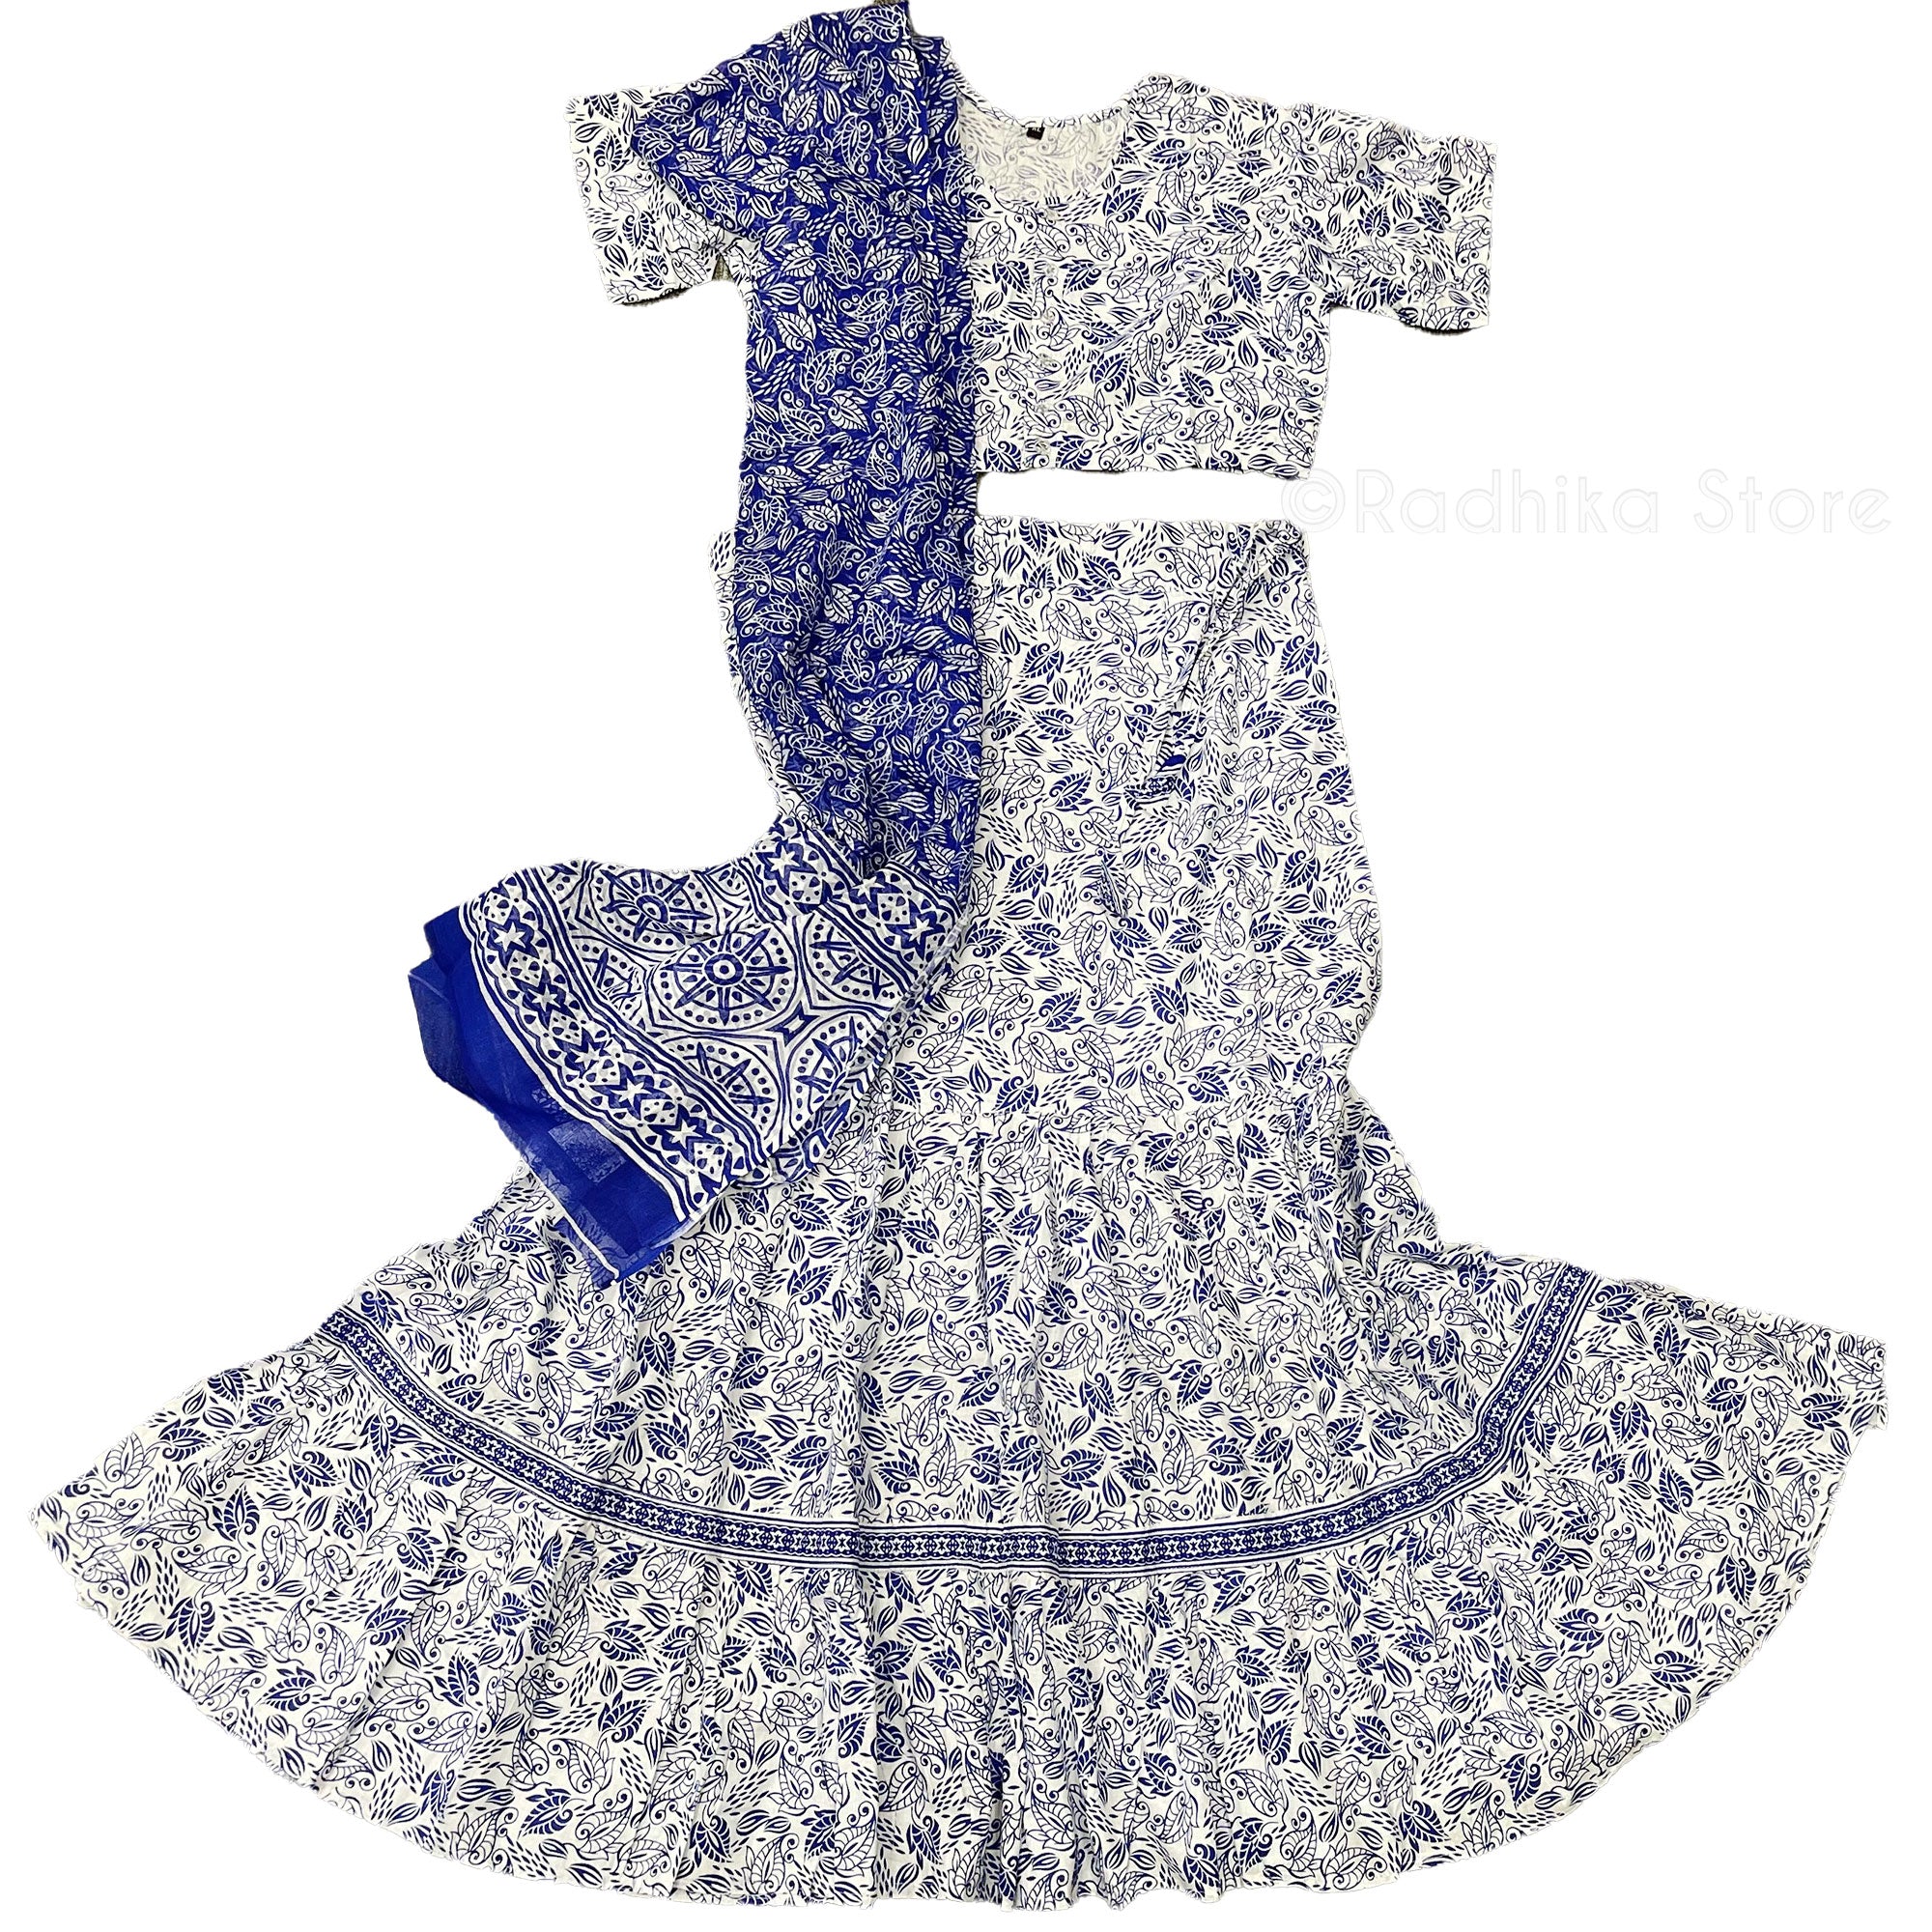 Blue Peacock Plume - White Cotton Gopi Skirt With Choli and Chadar - Size - M/L